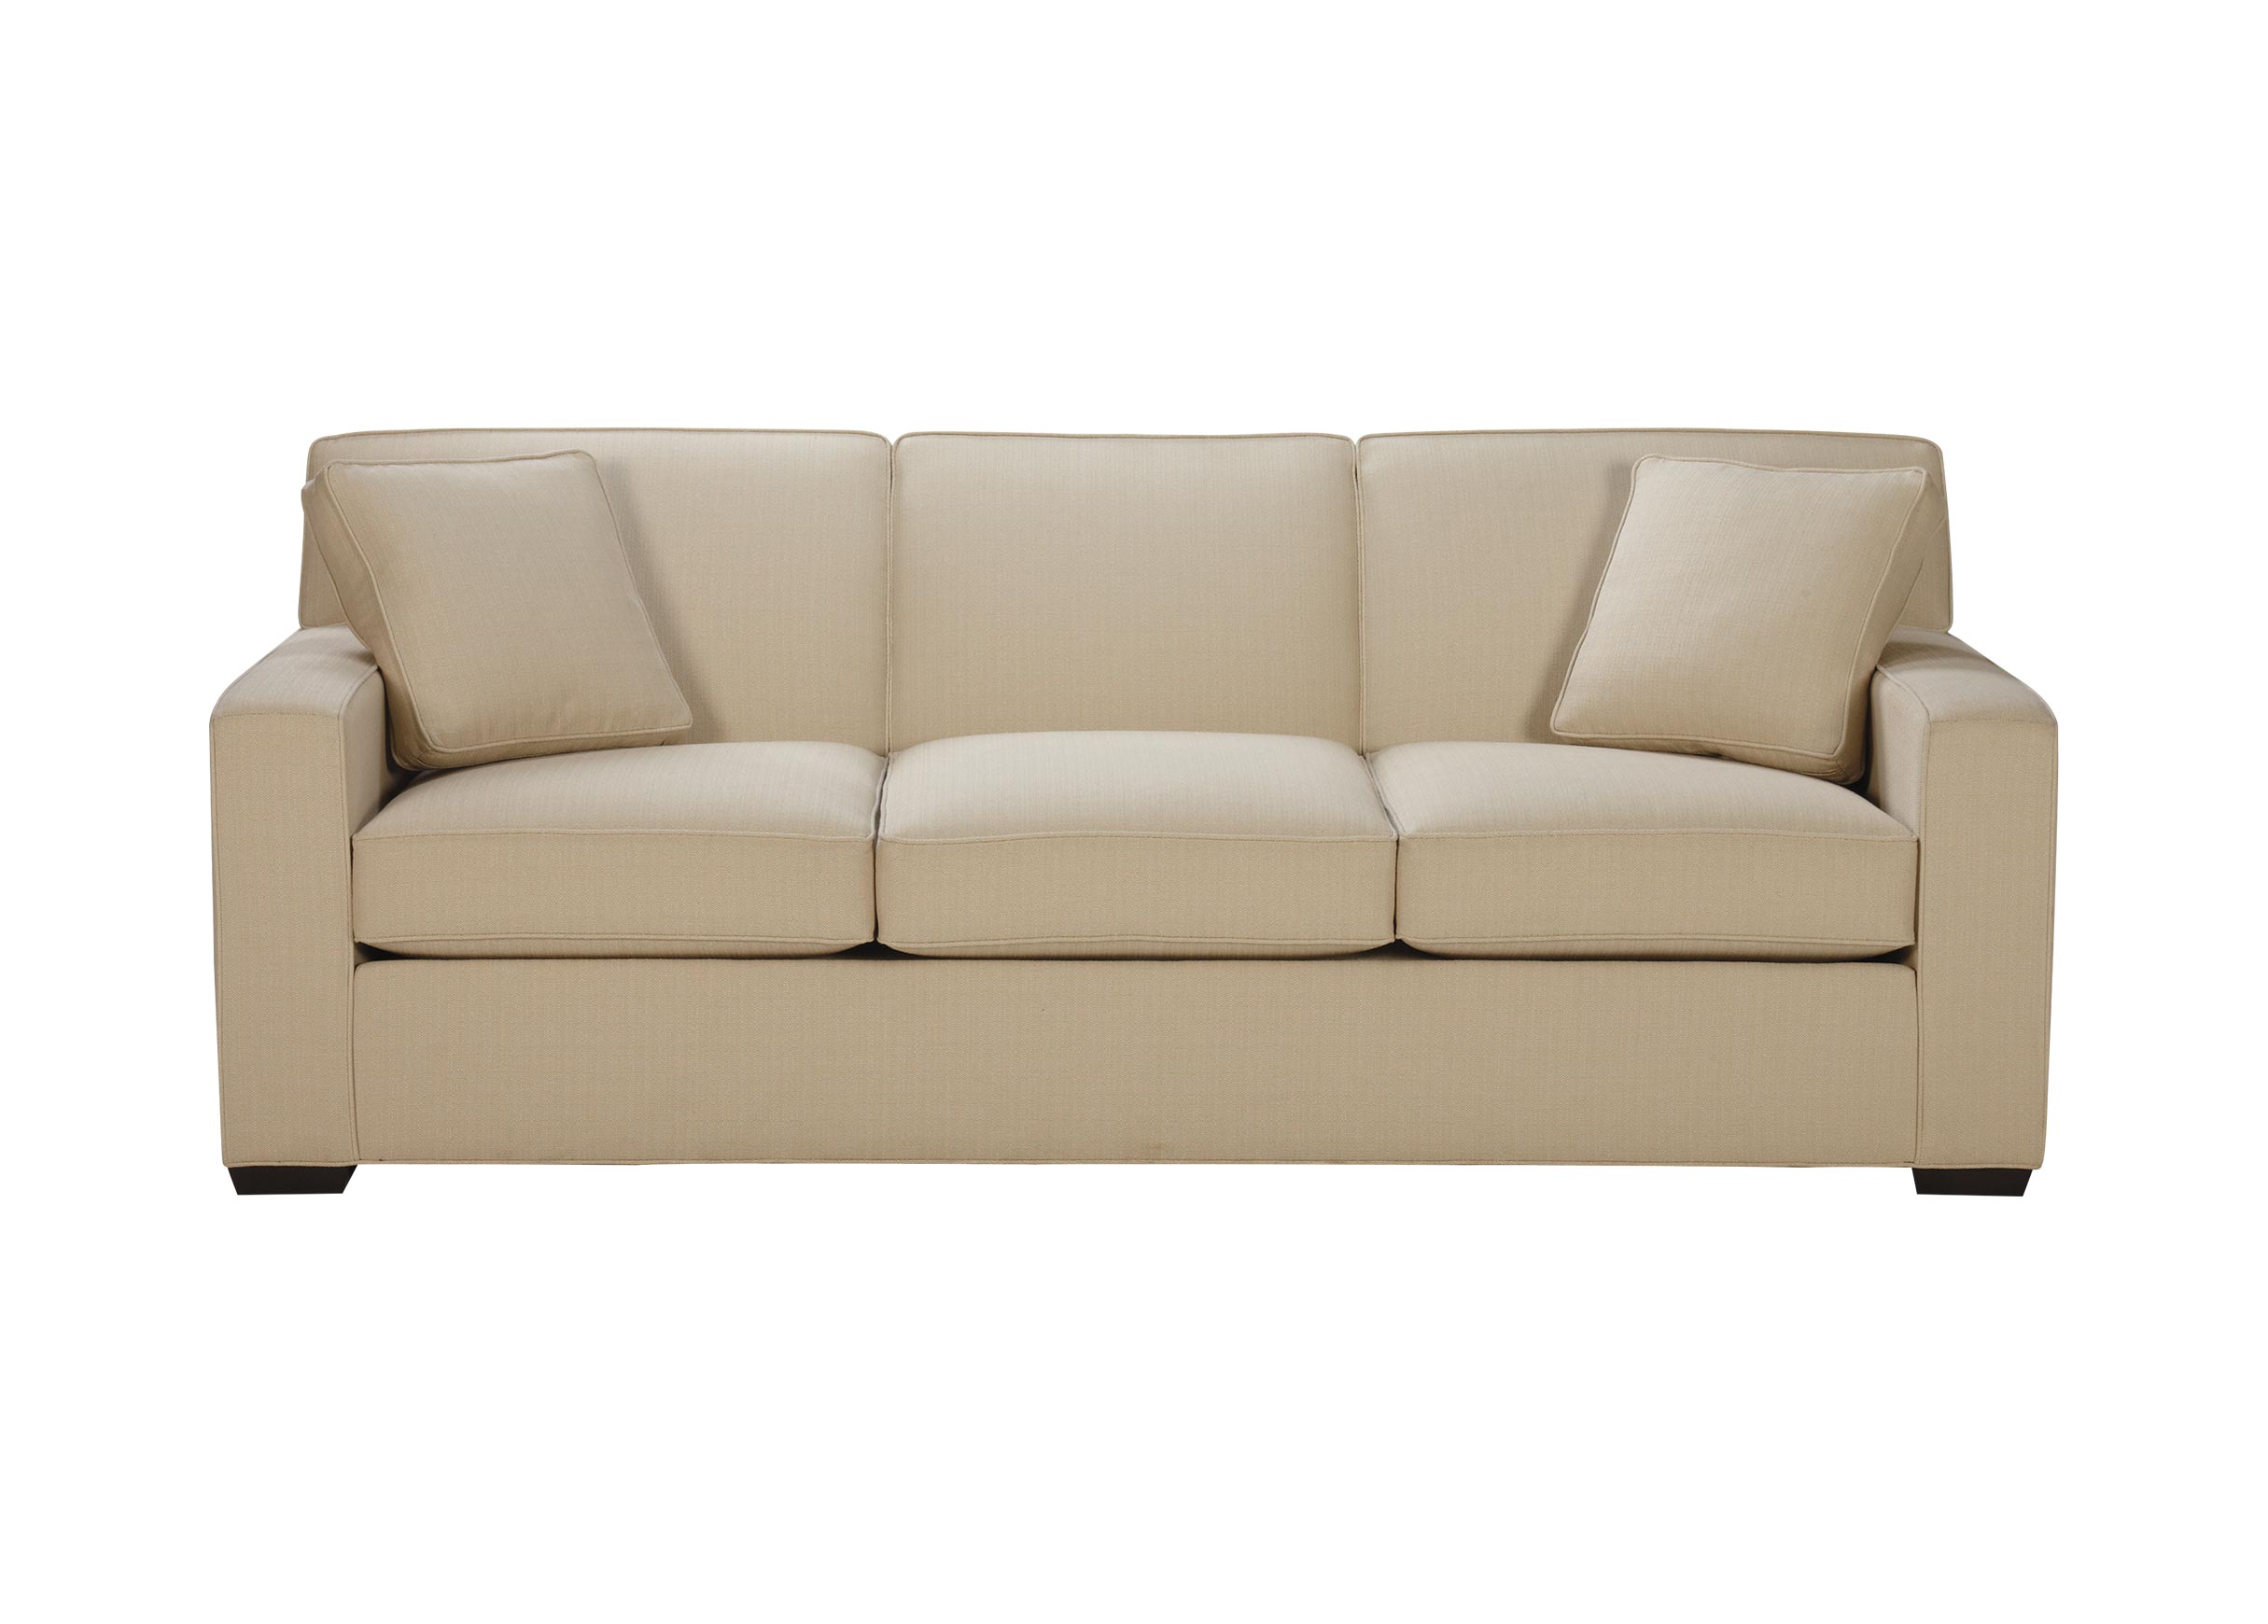 Kendall Sofa Sofas And Loveseats Ethan Allen